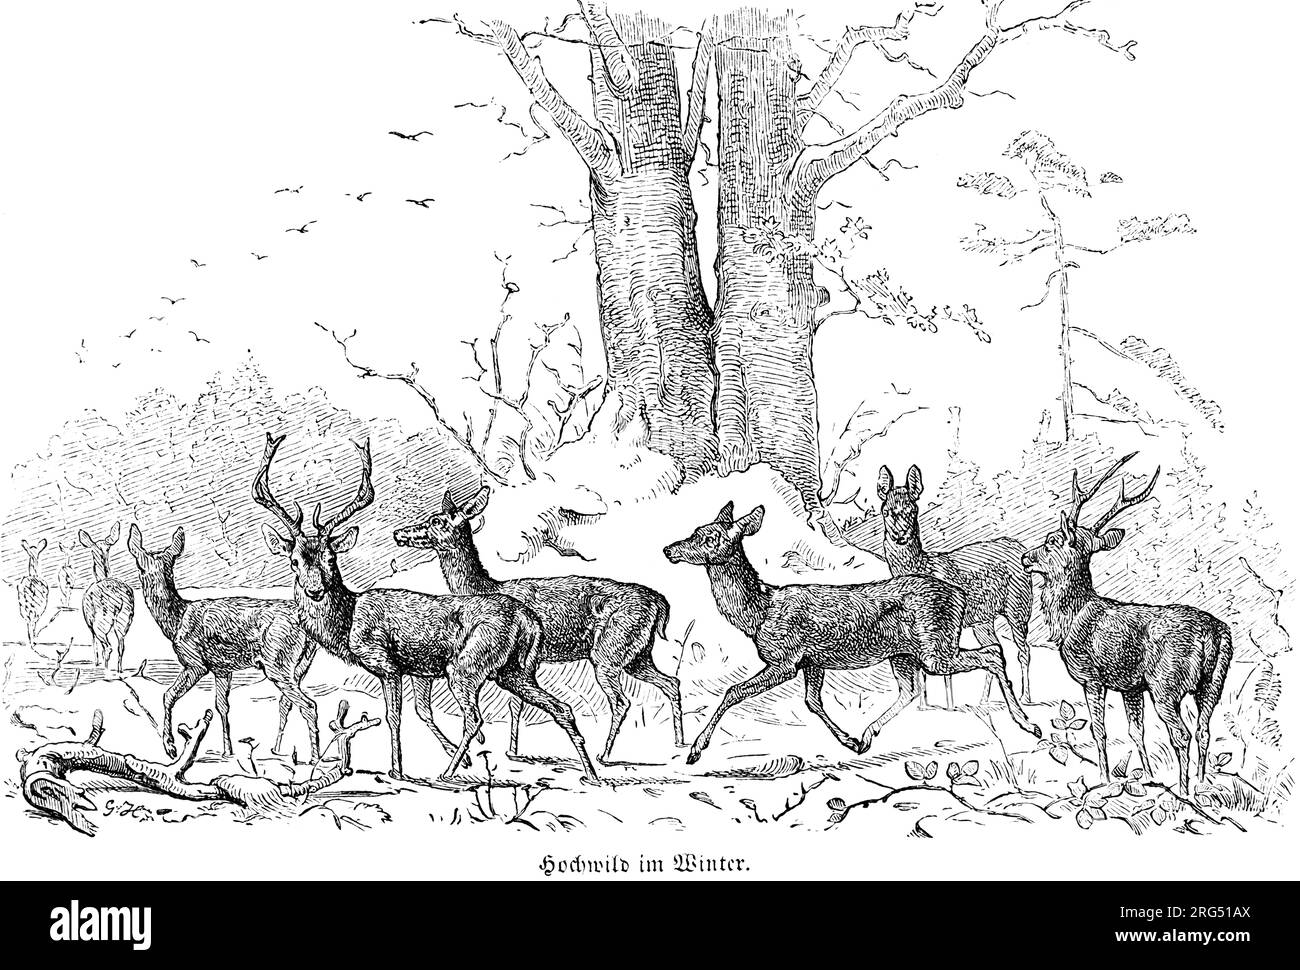 Big game in wintertime, Hochwild, wild animals and hunting scenes,, historical Illustration about1860 Stock Photo